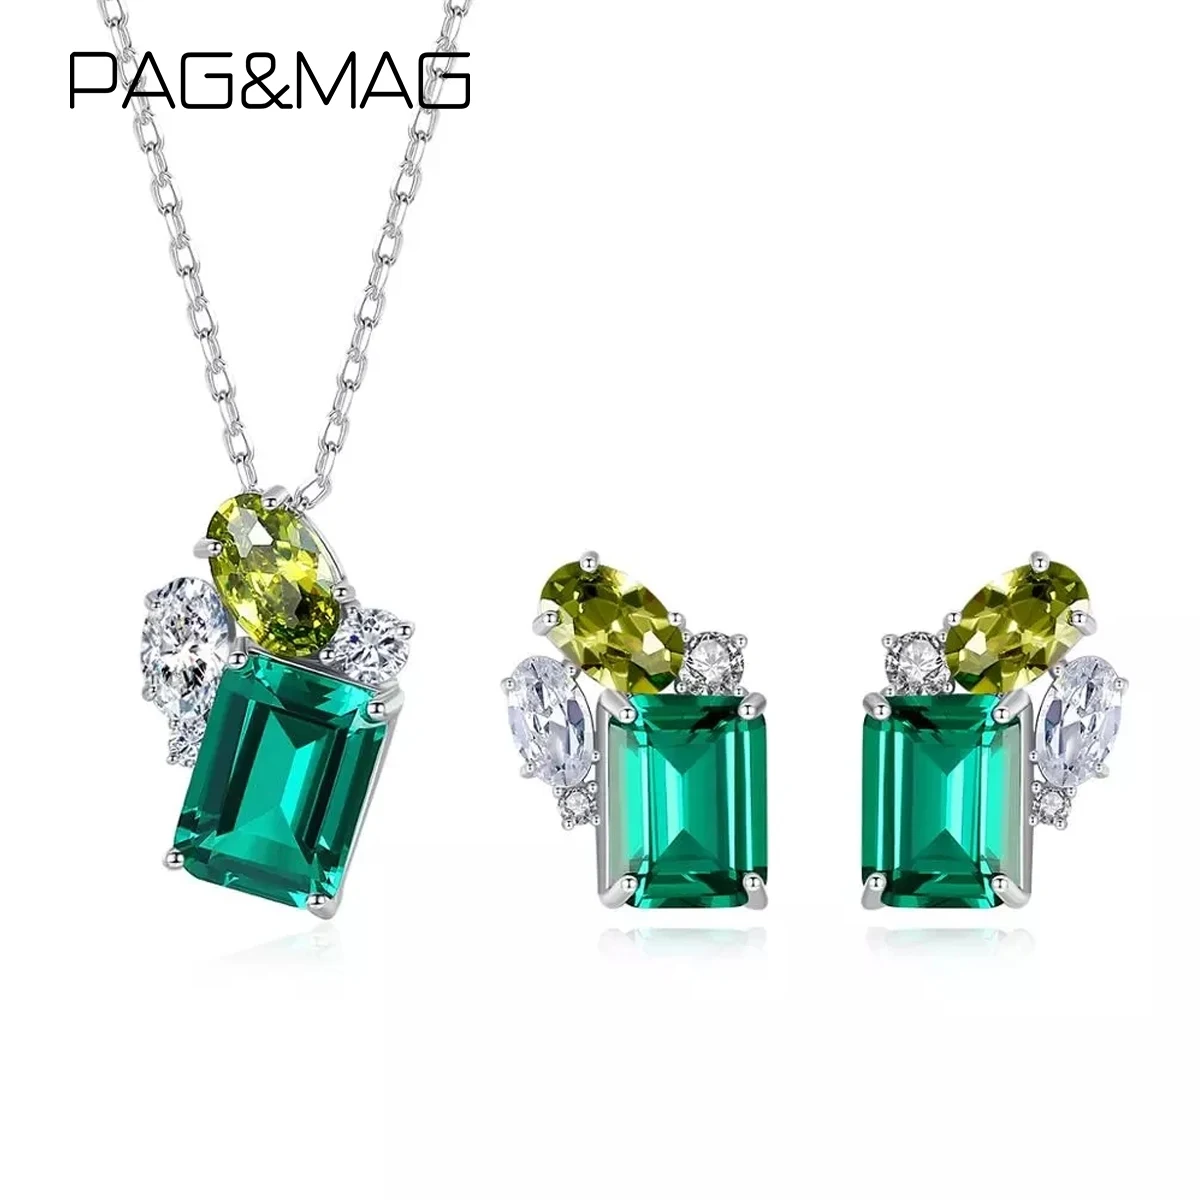 

PAG&MAG Luxury Emerald Square Necklace Earrings Set For Women Sterling Silver 925 Jewelry Set Green Gemstone Fine Jewelry